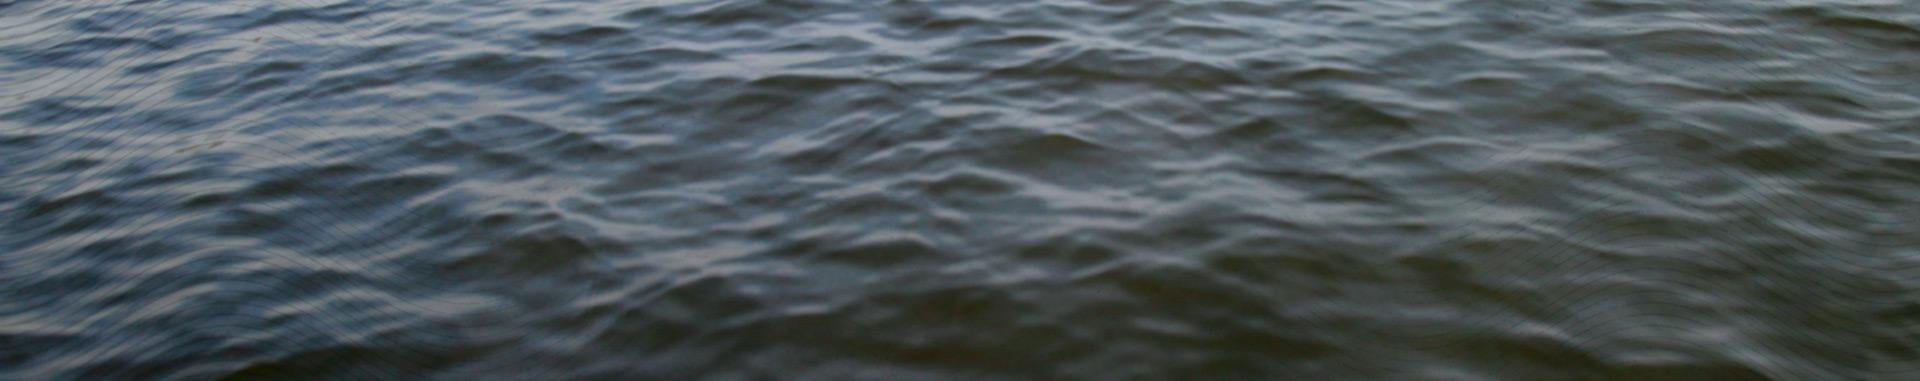 Panoramic closeup image of water ripples on the surface of a lake